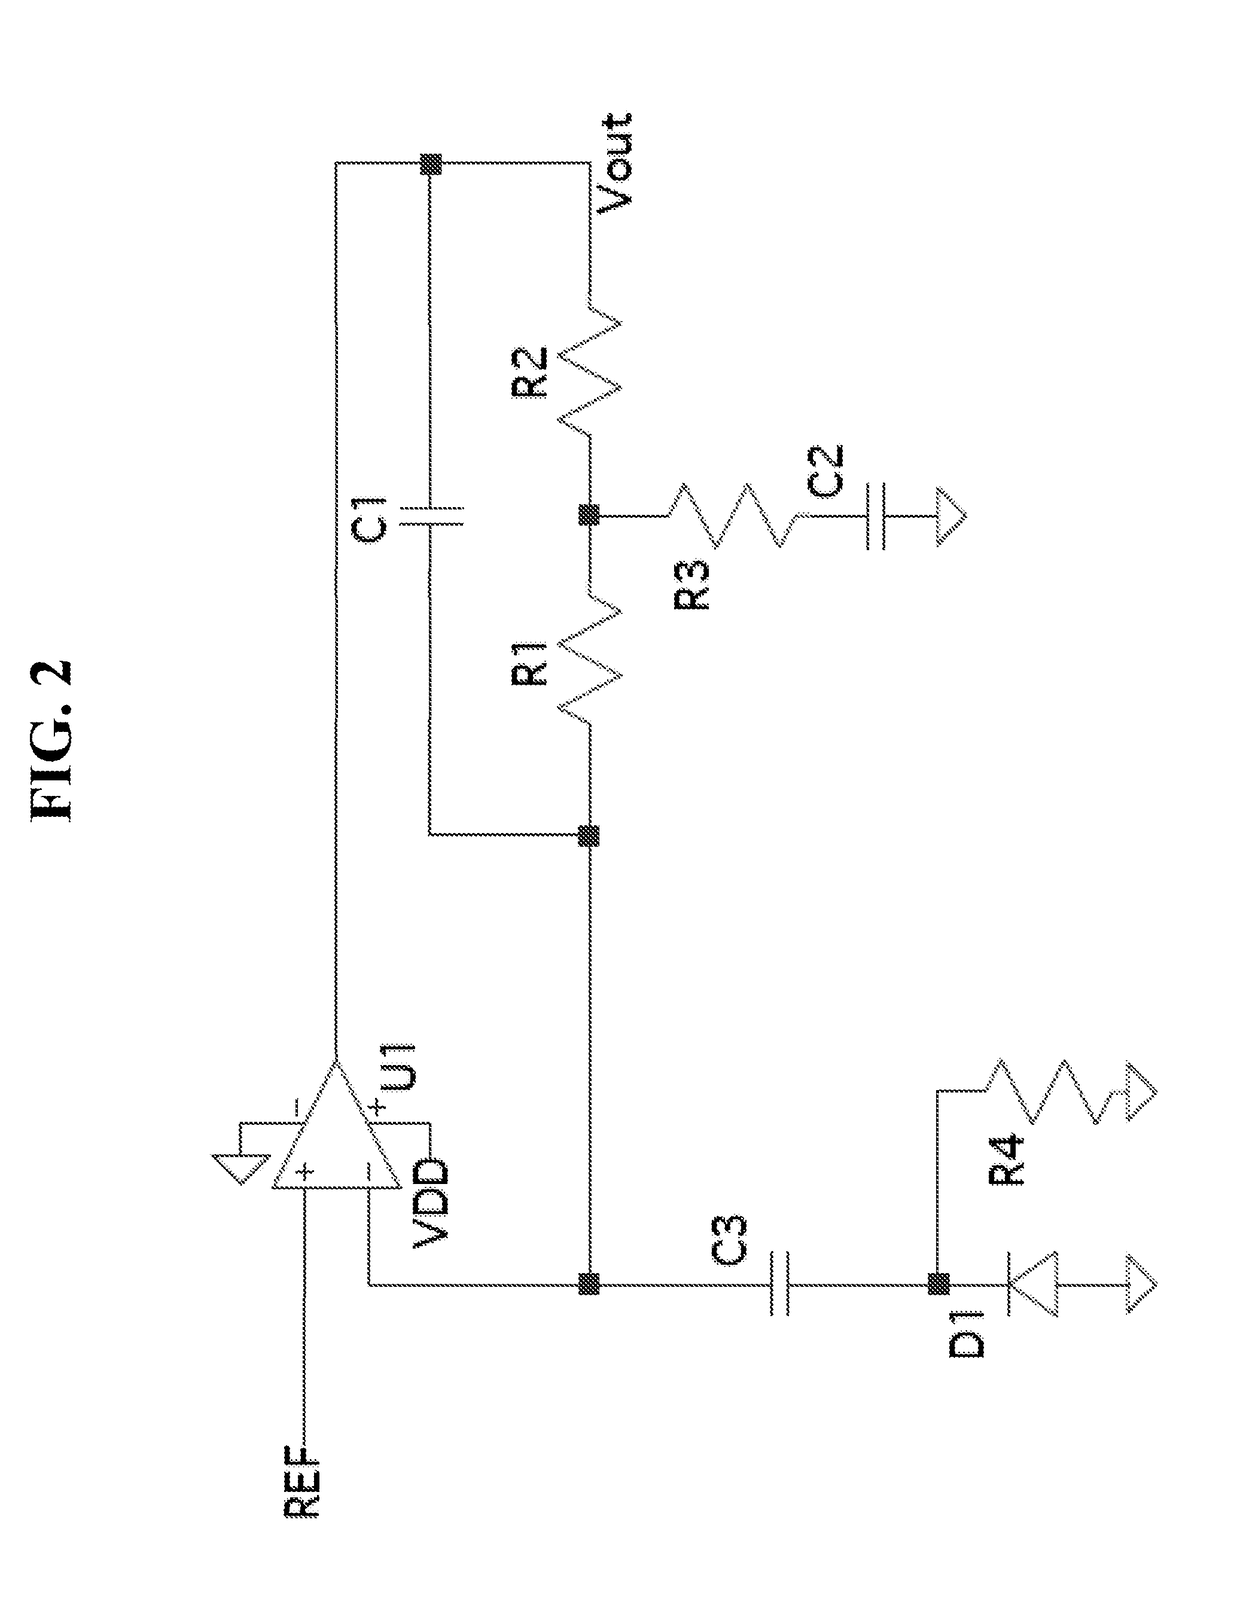 Light sensor readout system and method of converting light into electrical signals